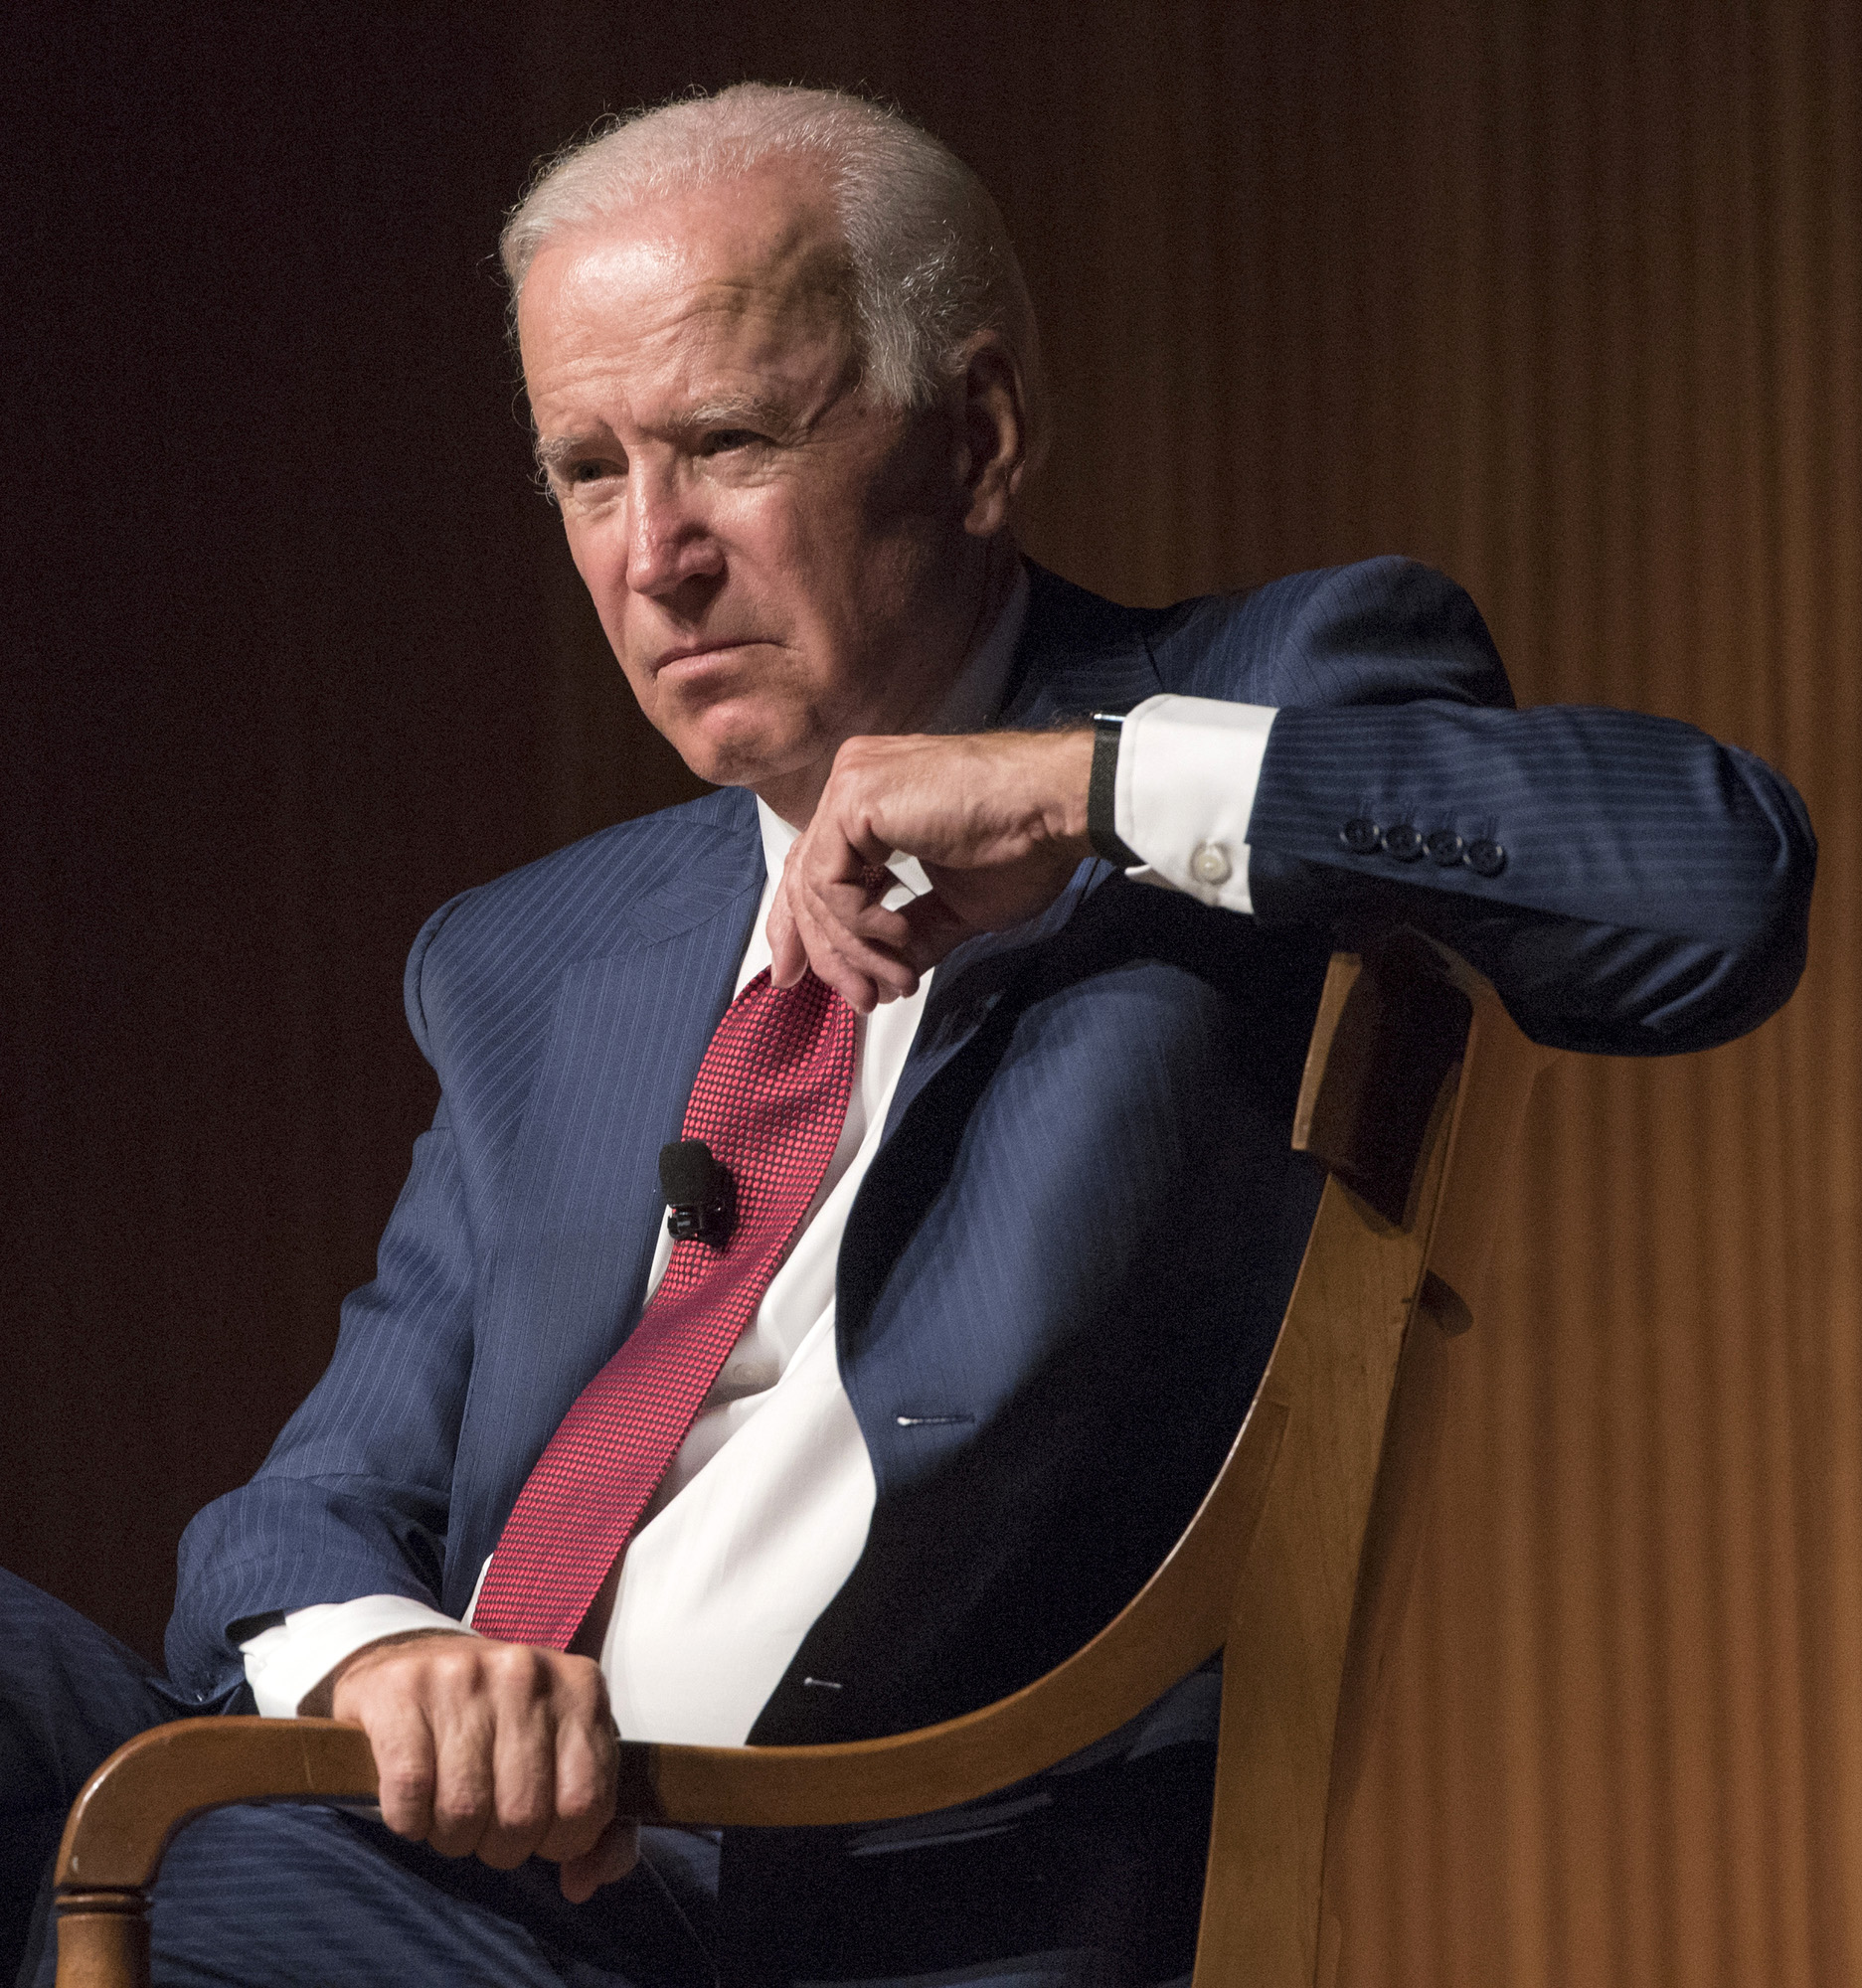 President elect Joe Biden fractured his foot playing with his dog Major